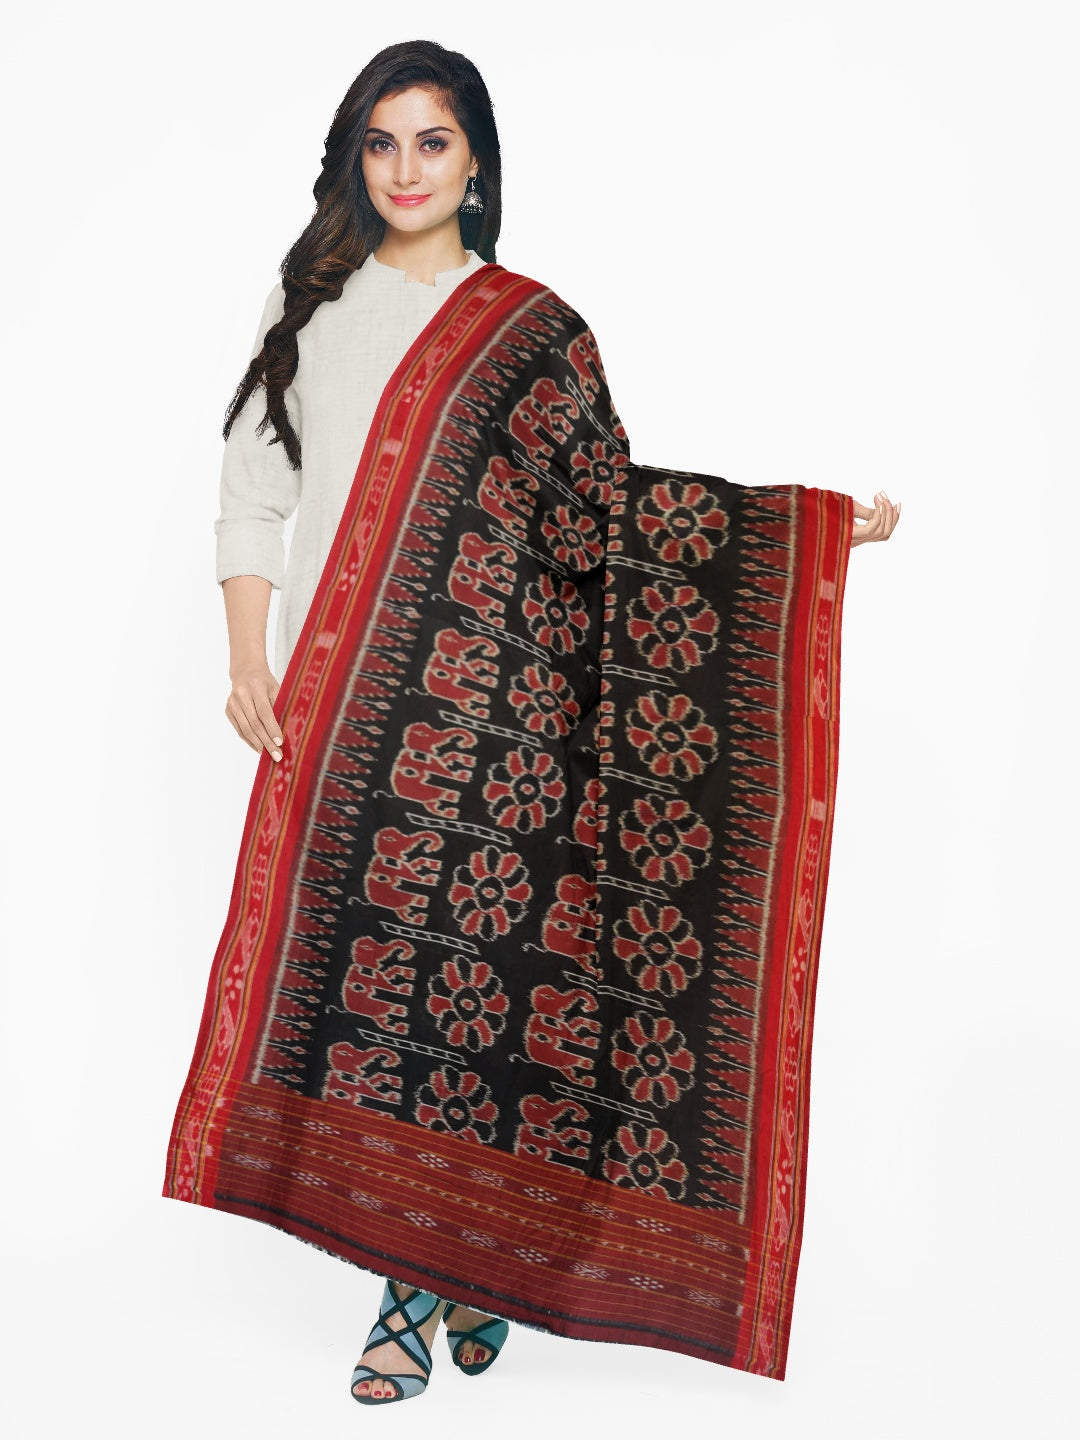 Black and Red Cotton ikat Dupatta with elephant and flower motifs woven